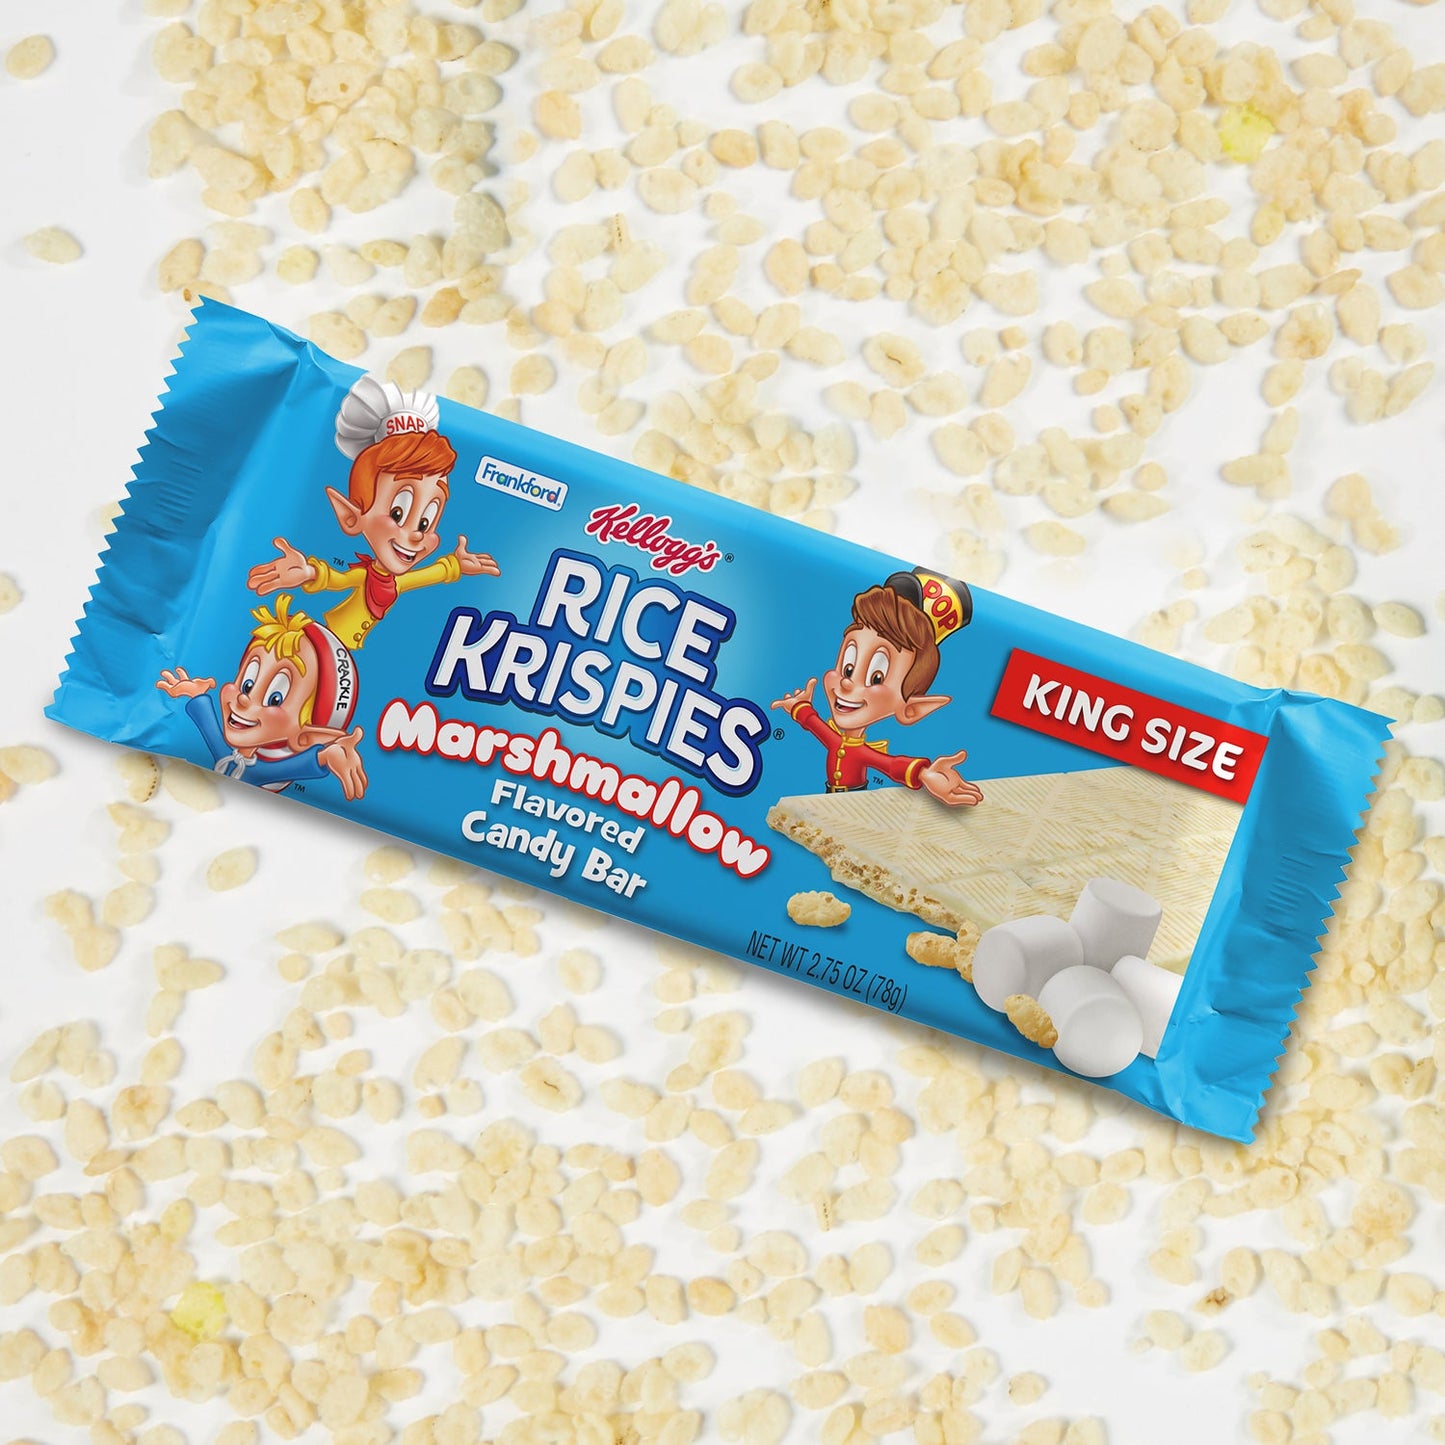 Blue candy bar wrapper surrounded by rice krispies cereal